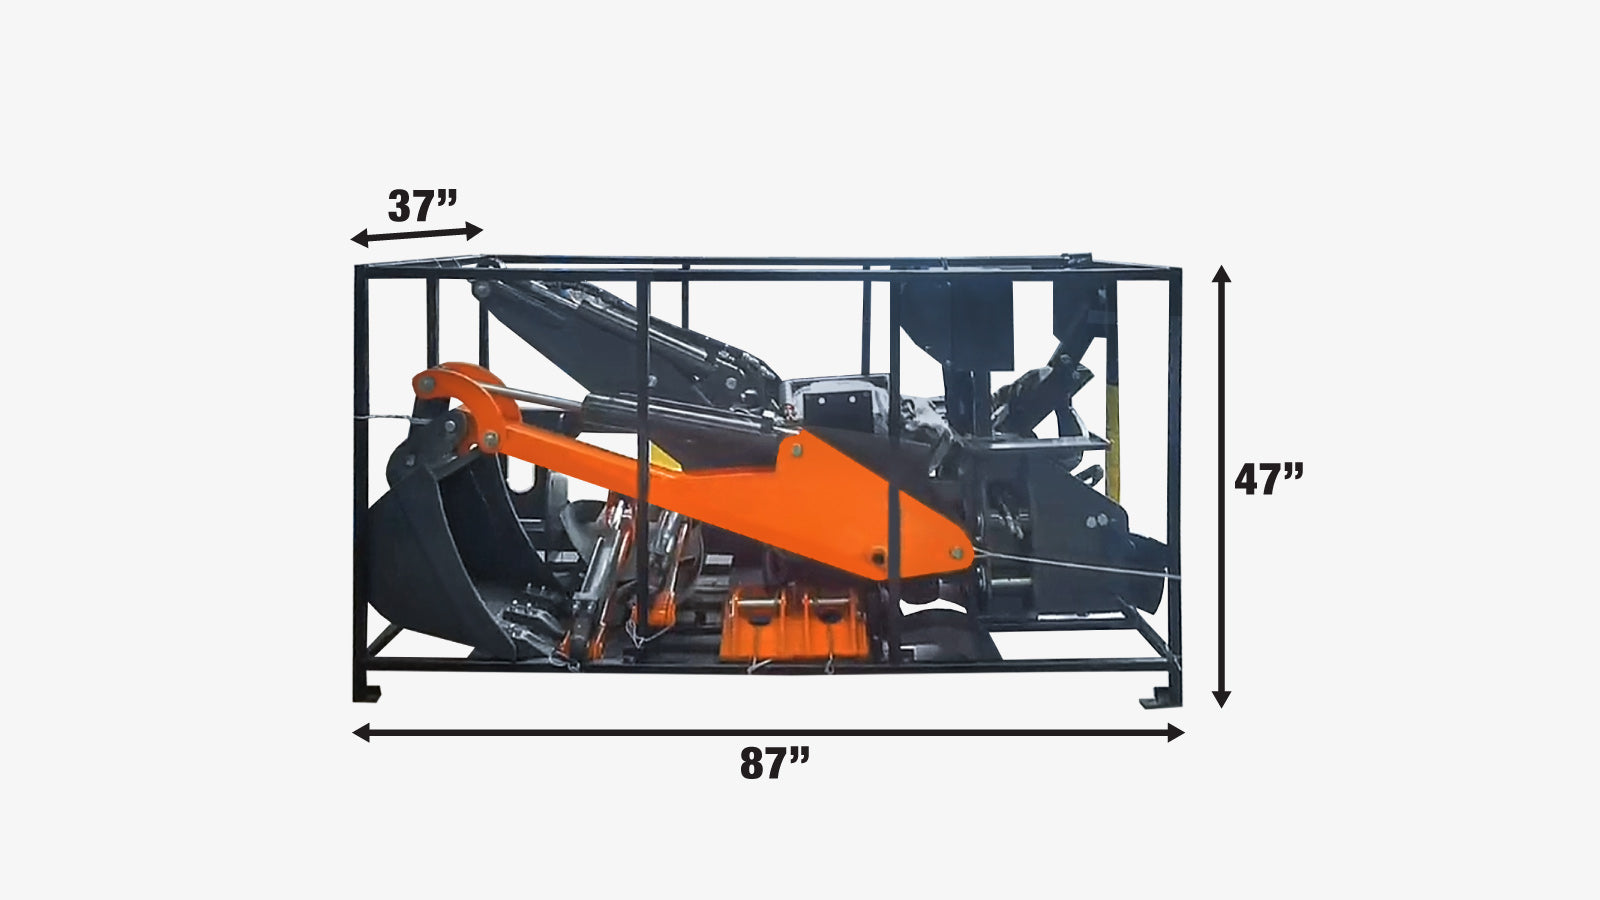 TMG Industrial Skid Steer Swivel Backhoe Attachment, 16” Bucket Included, 8’ Digging Depth, Foldable Stabilizers, TMG-SBH50-shipping-info-image